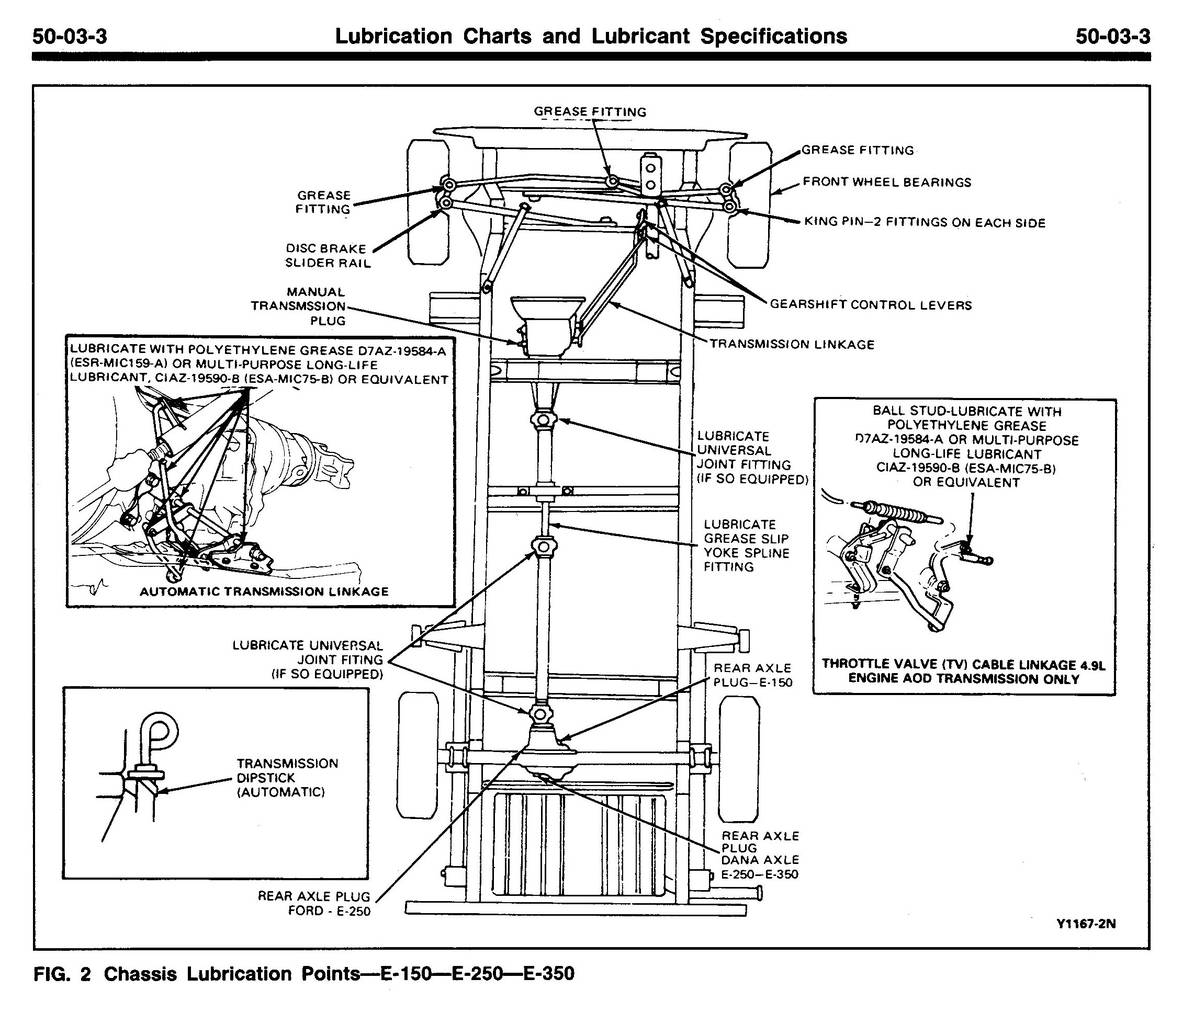 1985 Shop Manual-Pre Delivery,Lubrication and Maintenance-Lubrication